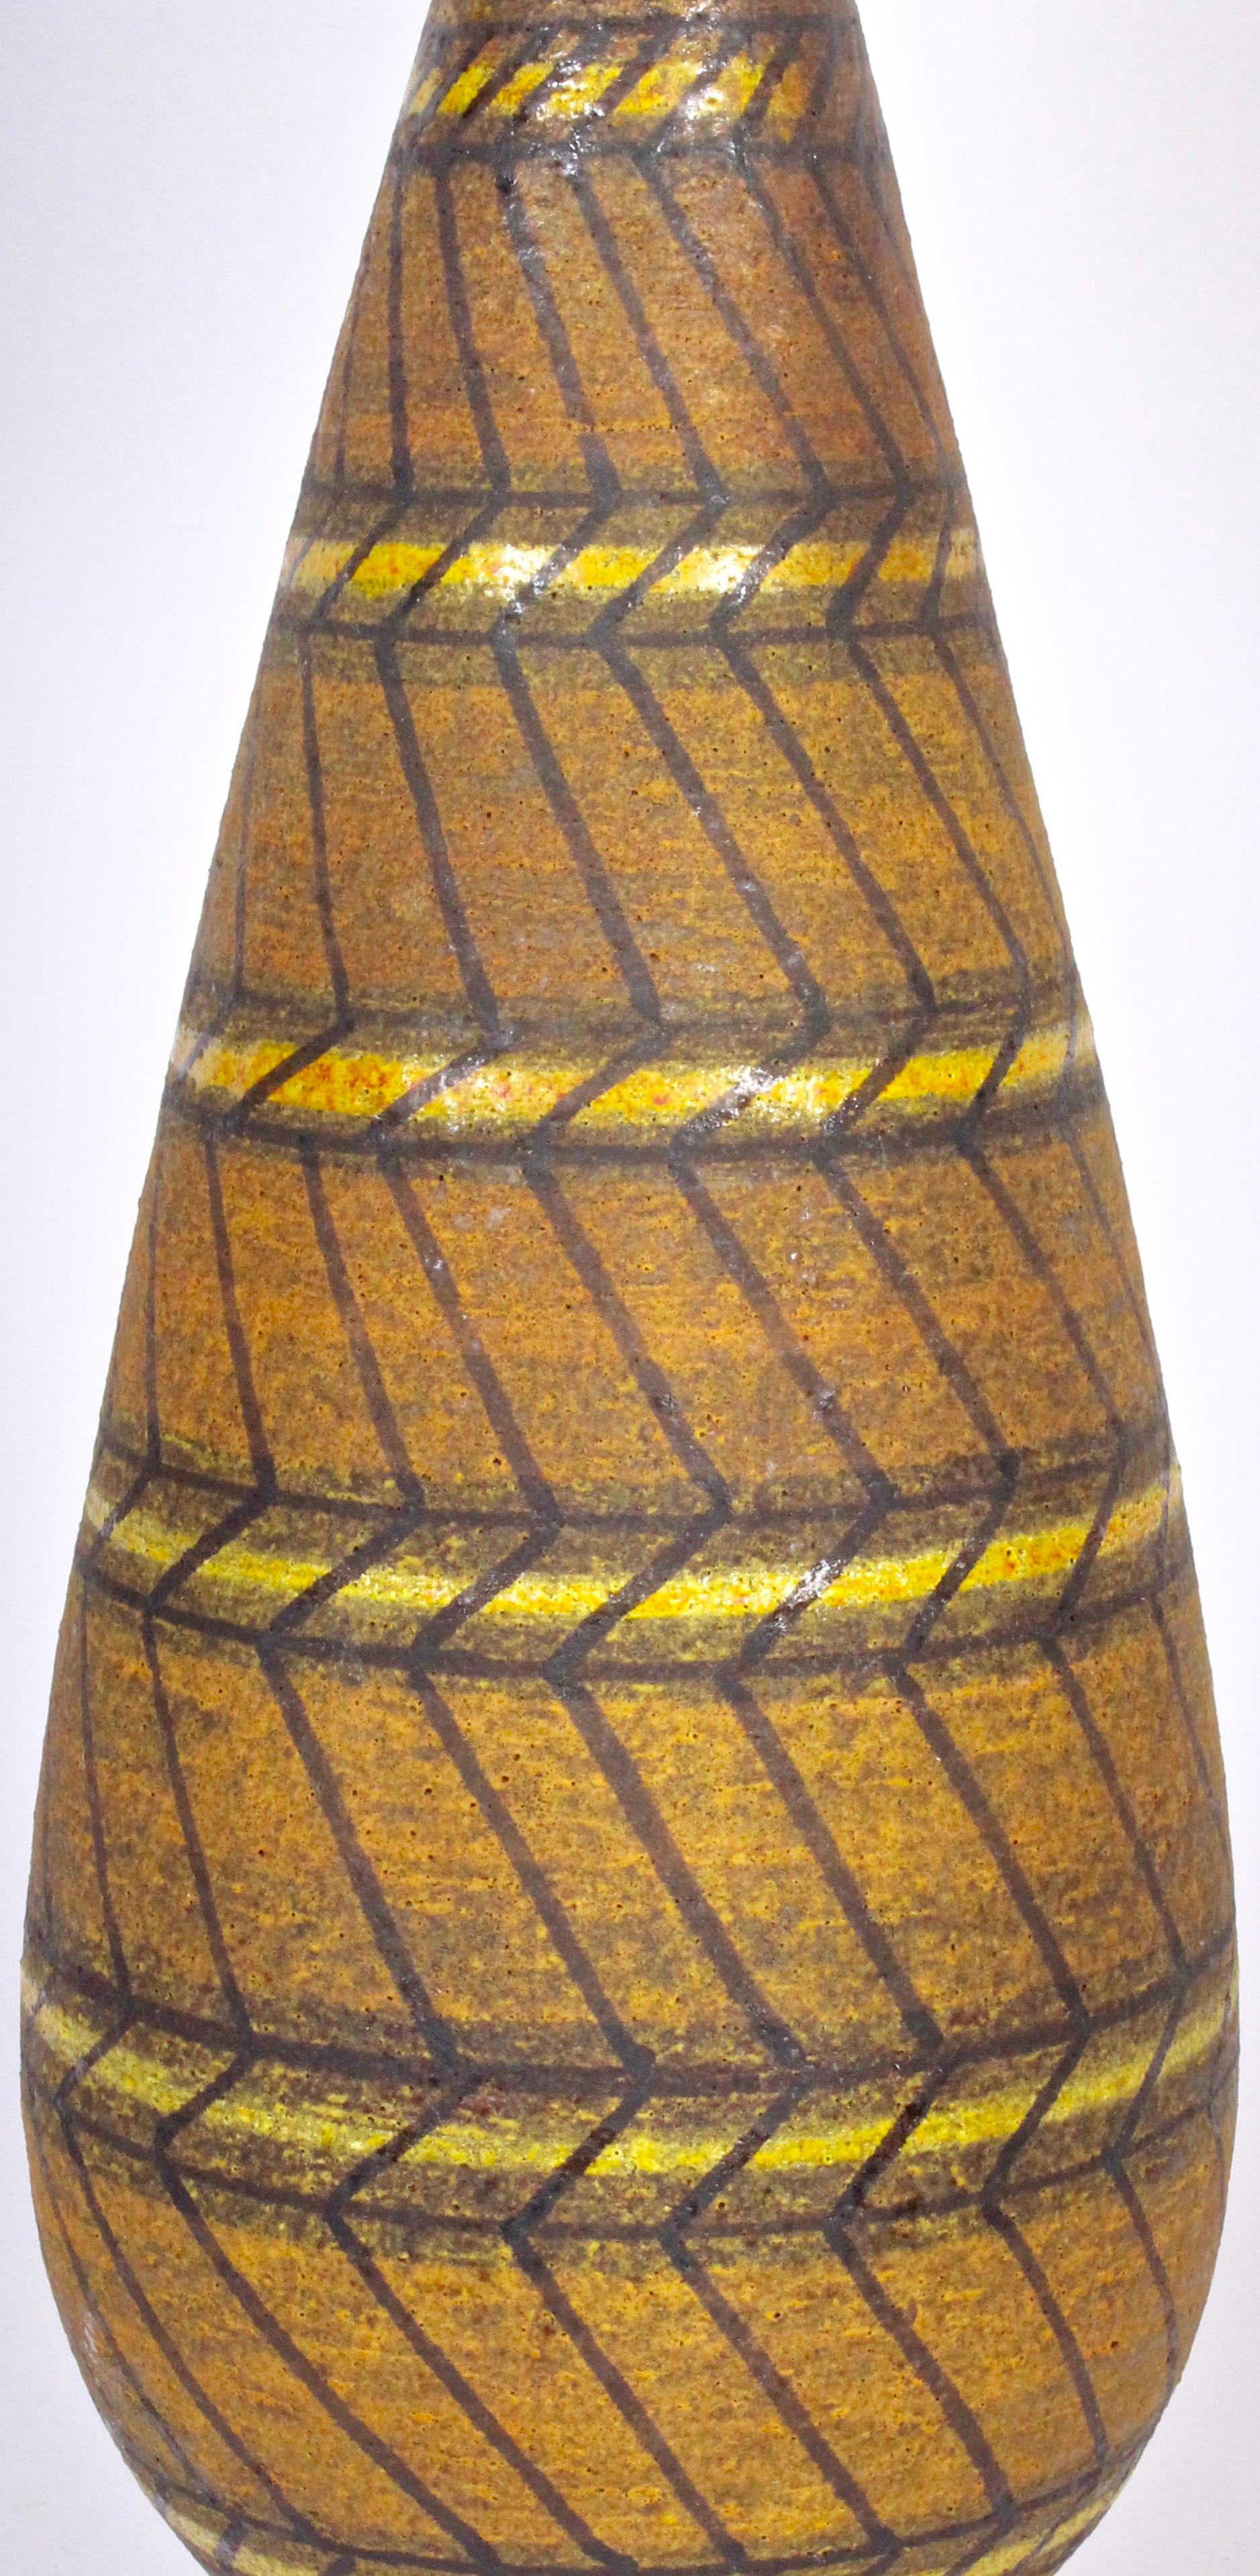 Aldo Londi Geometric Cocoa Art Pottery Table Lamp Hand Painted in Yellow, 1950s In Good Condition For Sale In Bainbridge, NY